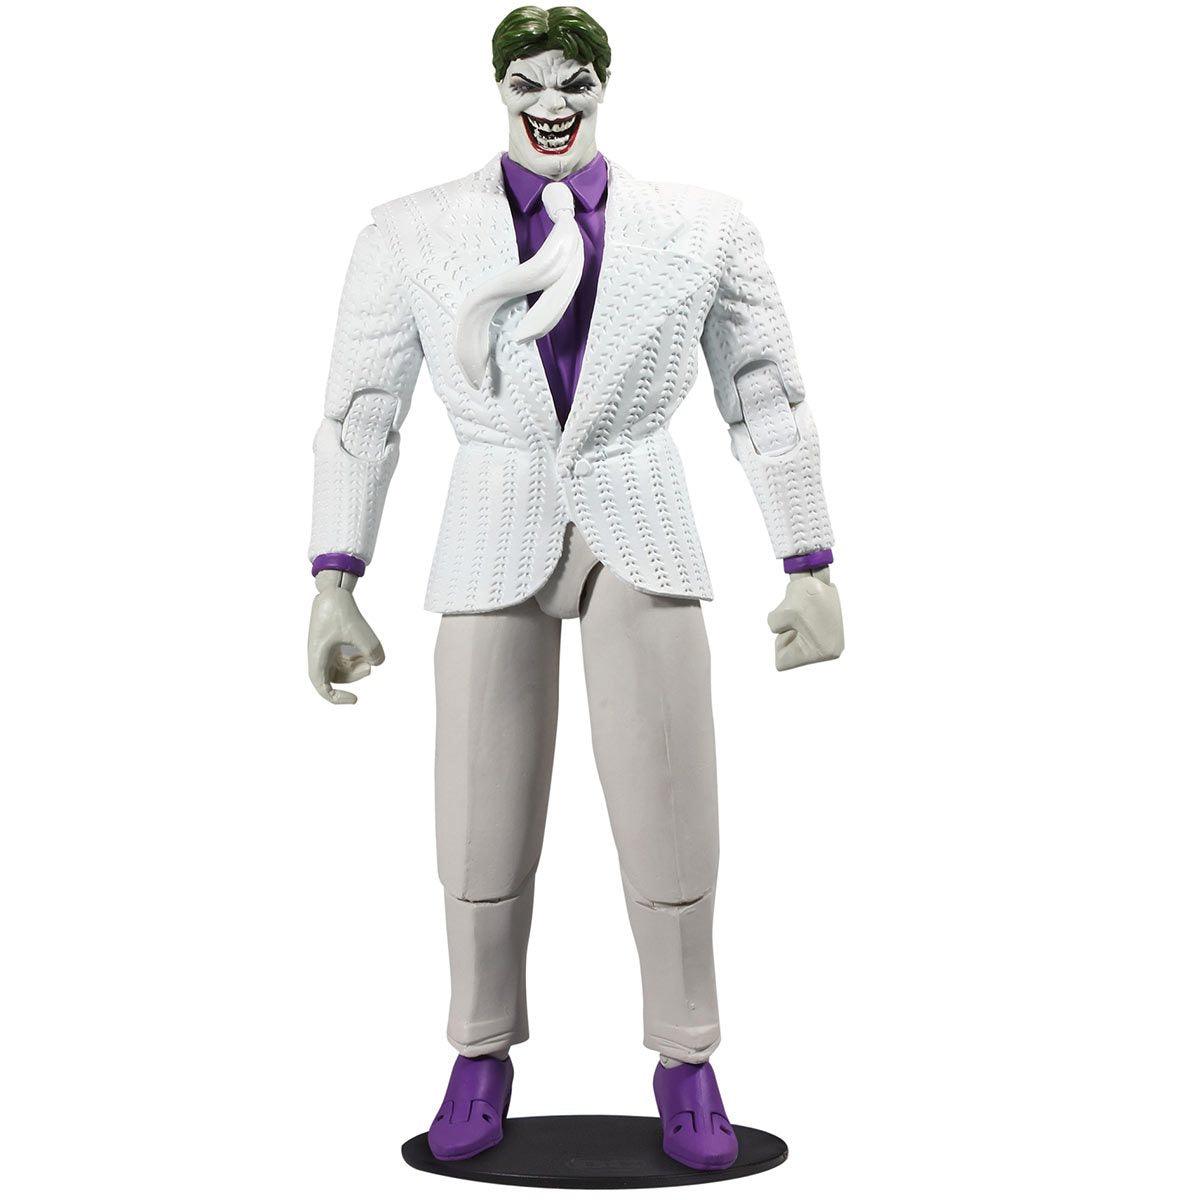 McFarlane Toys DC Build-A Wave 6 Dark Knight Returns Joker 7-Inch Scale Action Figure - BumbleToys - 18+, 6+ Years, Action Figures, Batman, Boys, collectible, collectors, dup-review-publication, Figures, McFarlane Toys, OXE, Pre-Order